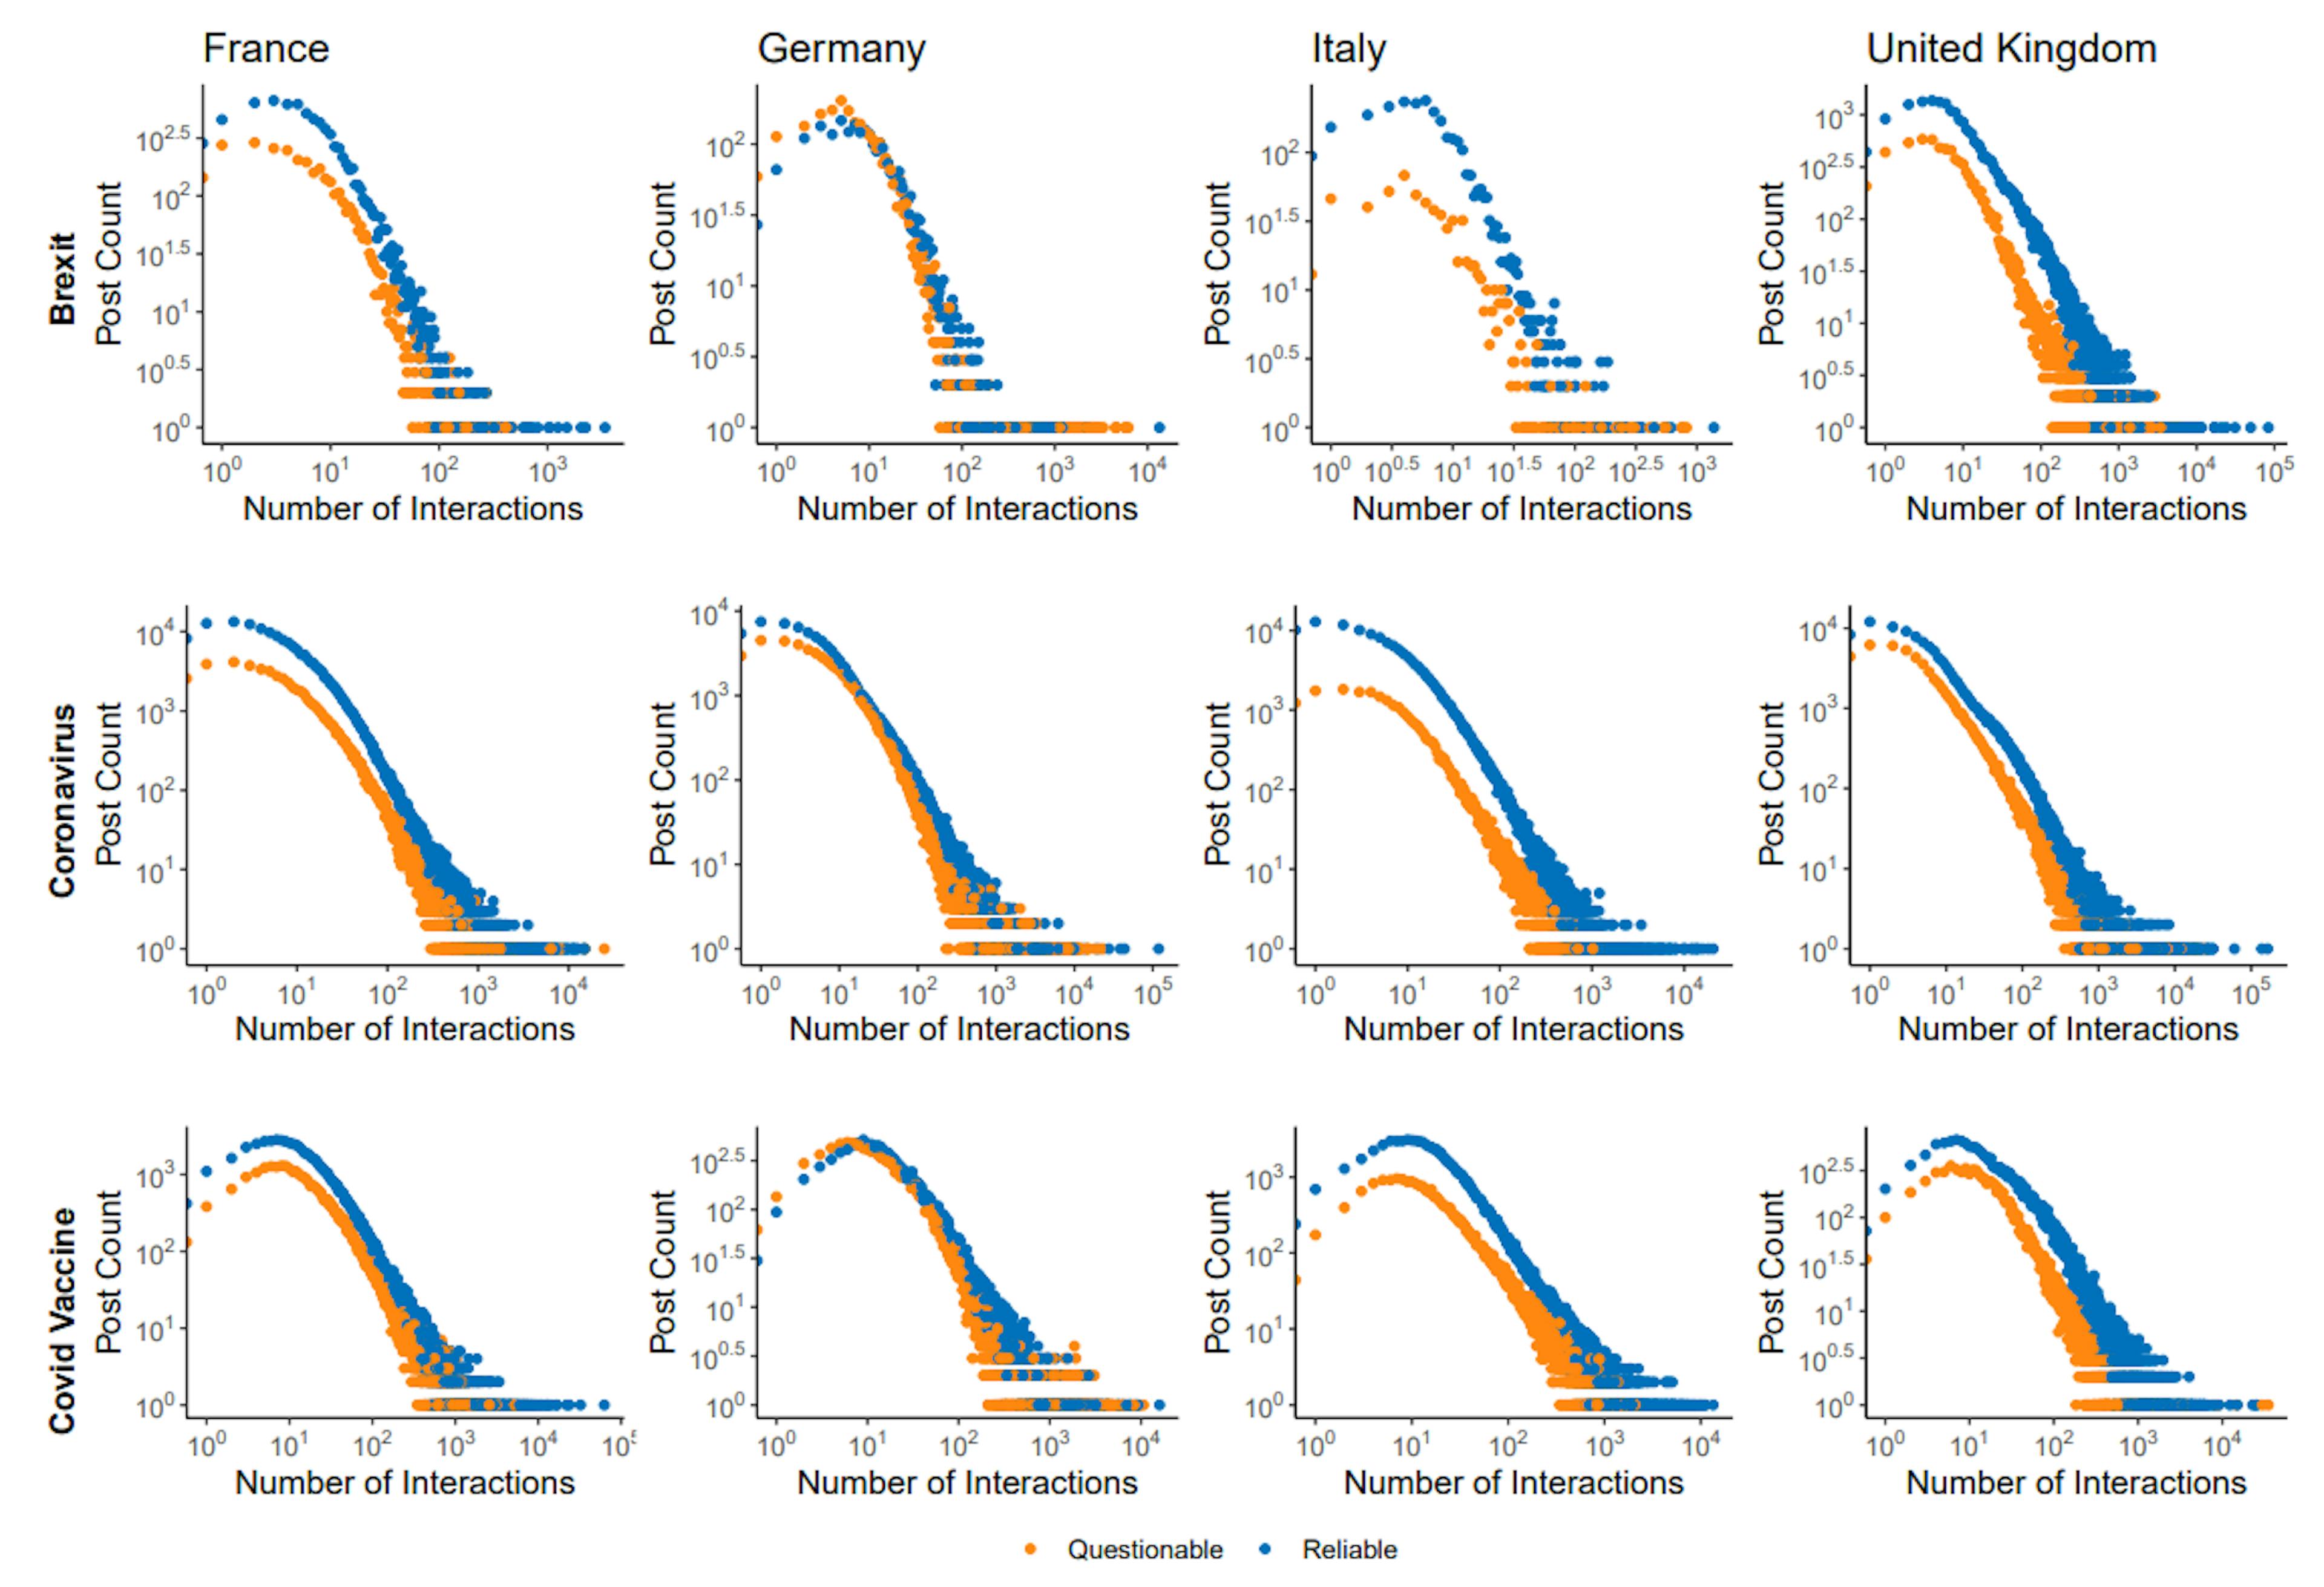 Figure 3: Distribution of tweet interactions by country for reliable (blue) and questionable (orange) news sources around Brexit (top row), Coronavirus (middle row), and Covid Vaccine (bottom row). Tweet interactions are computed as the sum of likes, retweets, quotes, and comments received by each tweet.